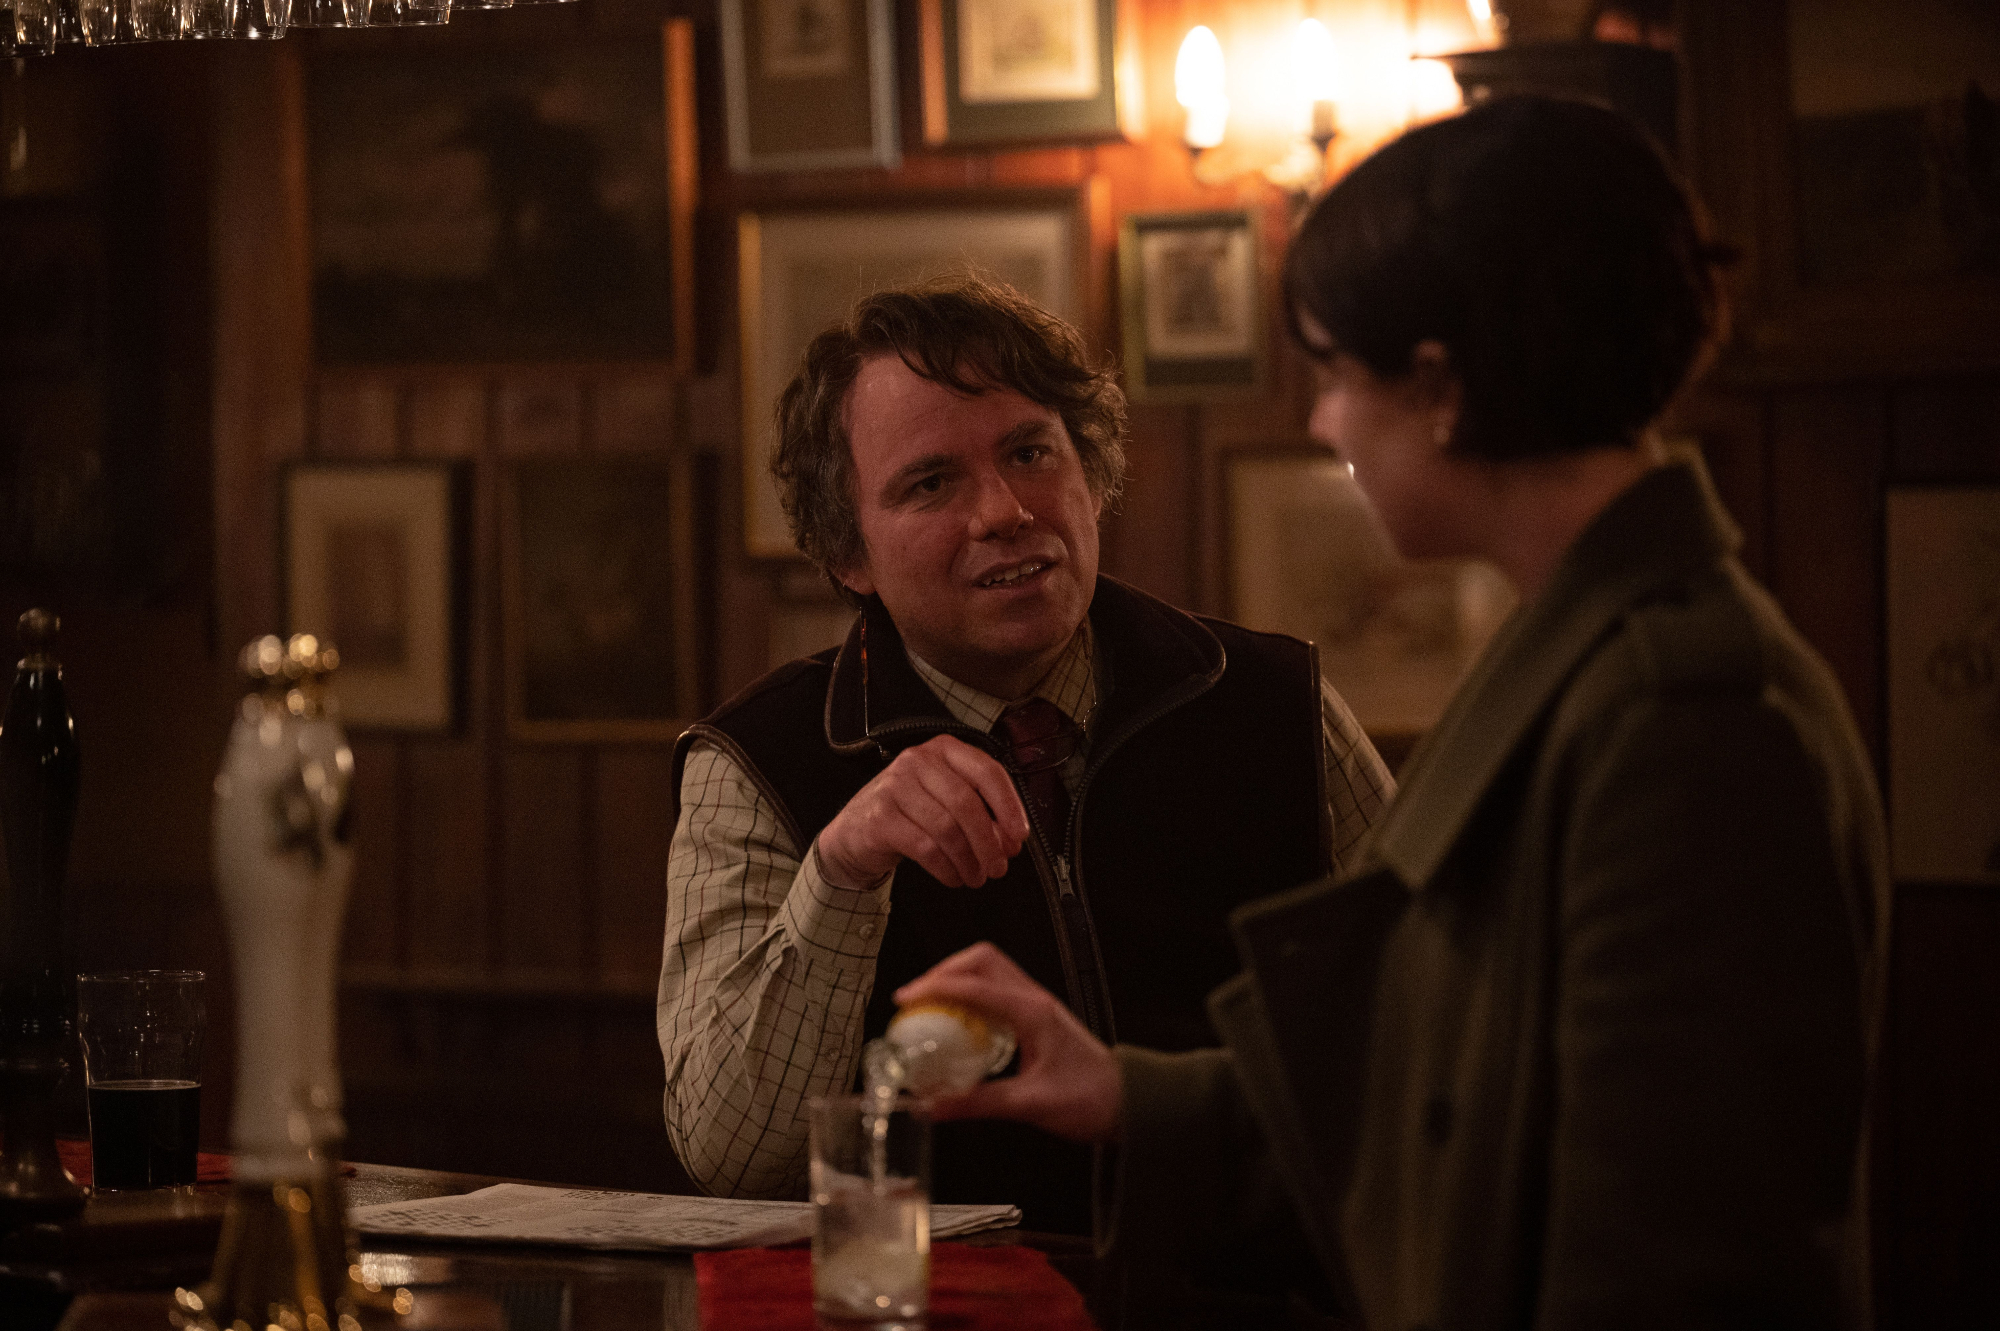 Rory Kinnear as Geoffrey and Jessie Buckley as Harper in 'Men' sitting at the bar in a pub looking at each other